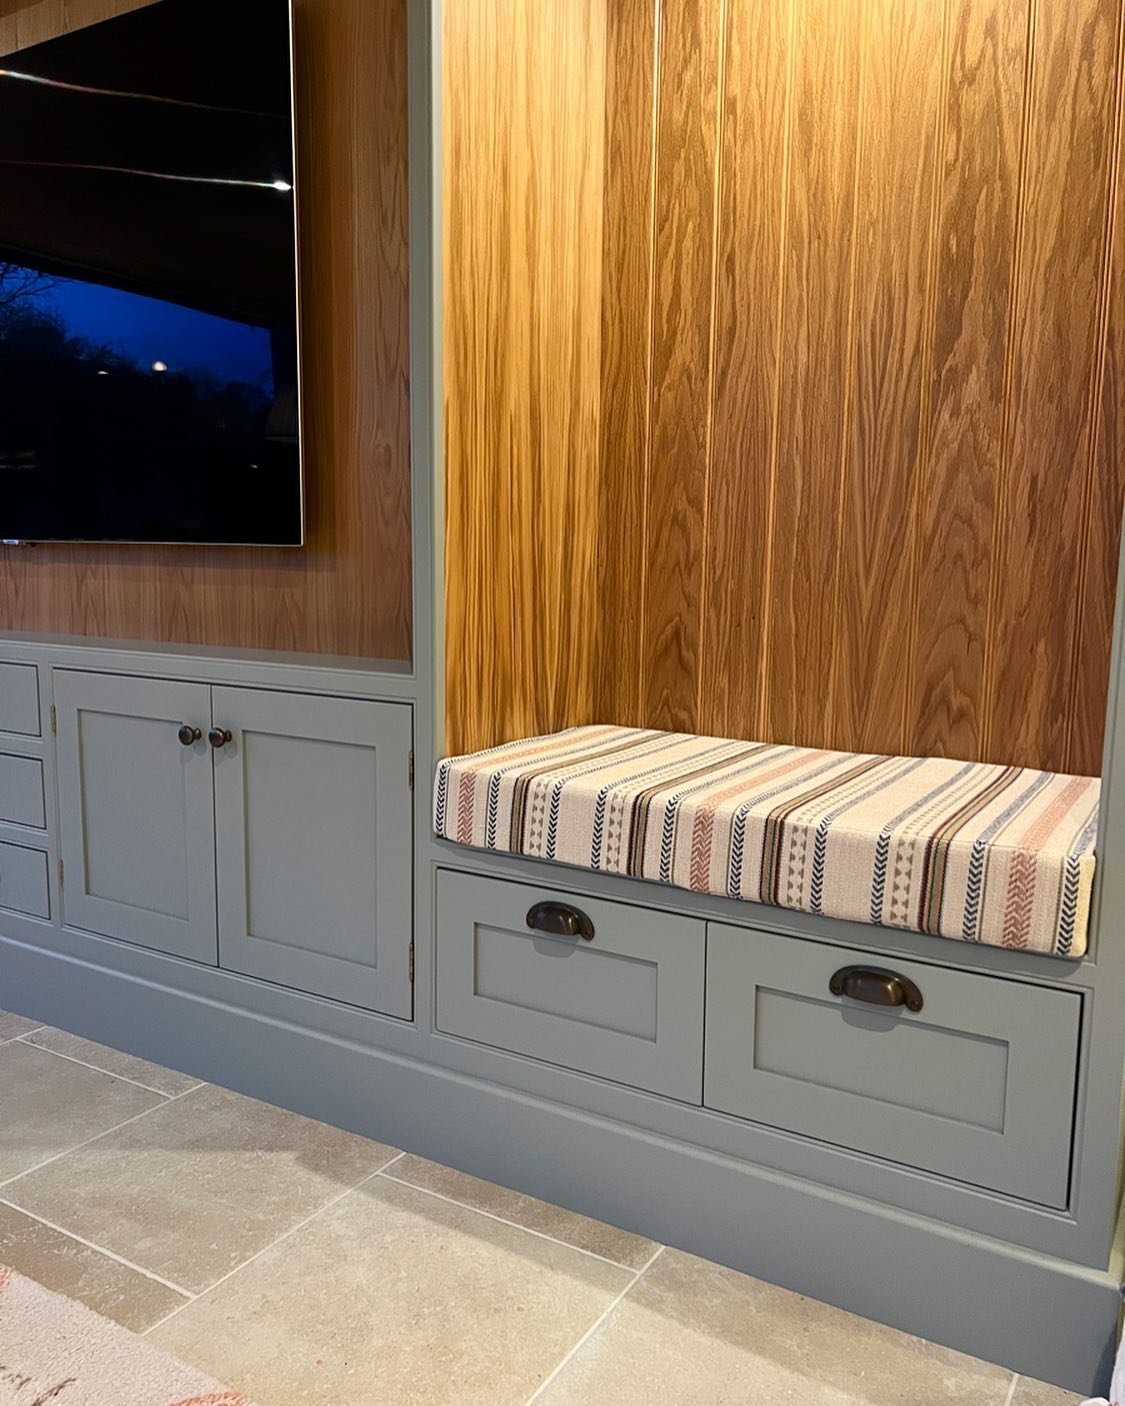 Media wall cabinetry hand painted in #farrowandballpigeon sitting perfectly against the warm oak interiors. Cabinetry by @newcastlefurniturecompany 

#handpainted #specialistpainting #handpaintedfurniture #handpaintedcabinets #mediawall #mediacabinet